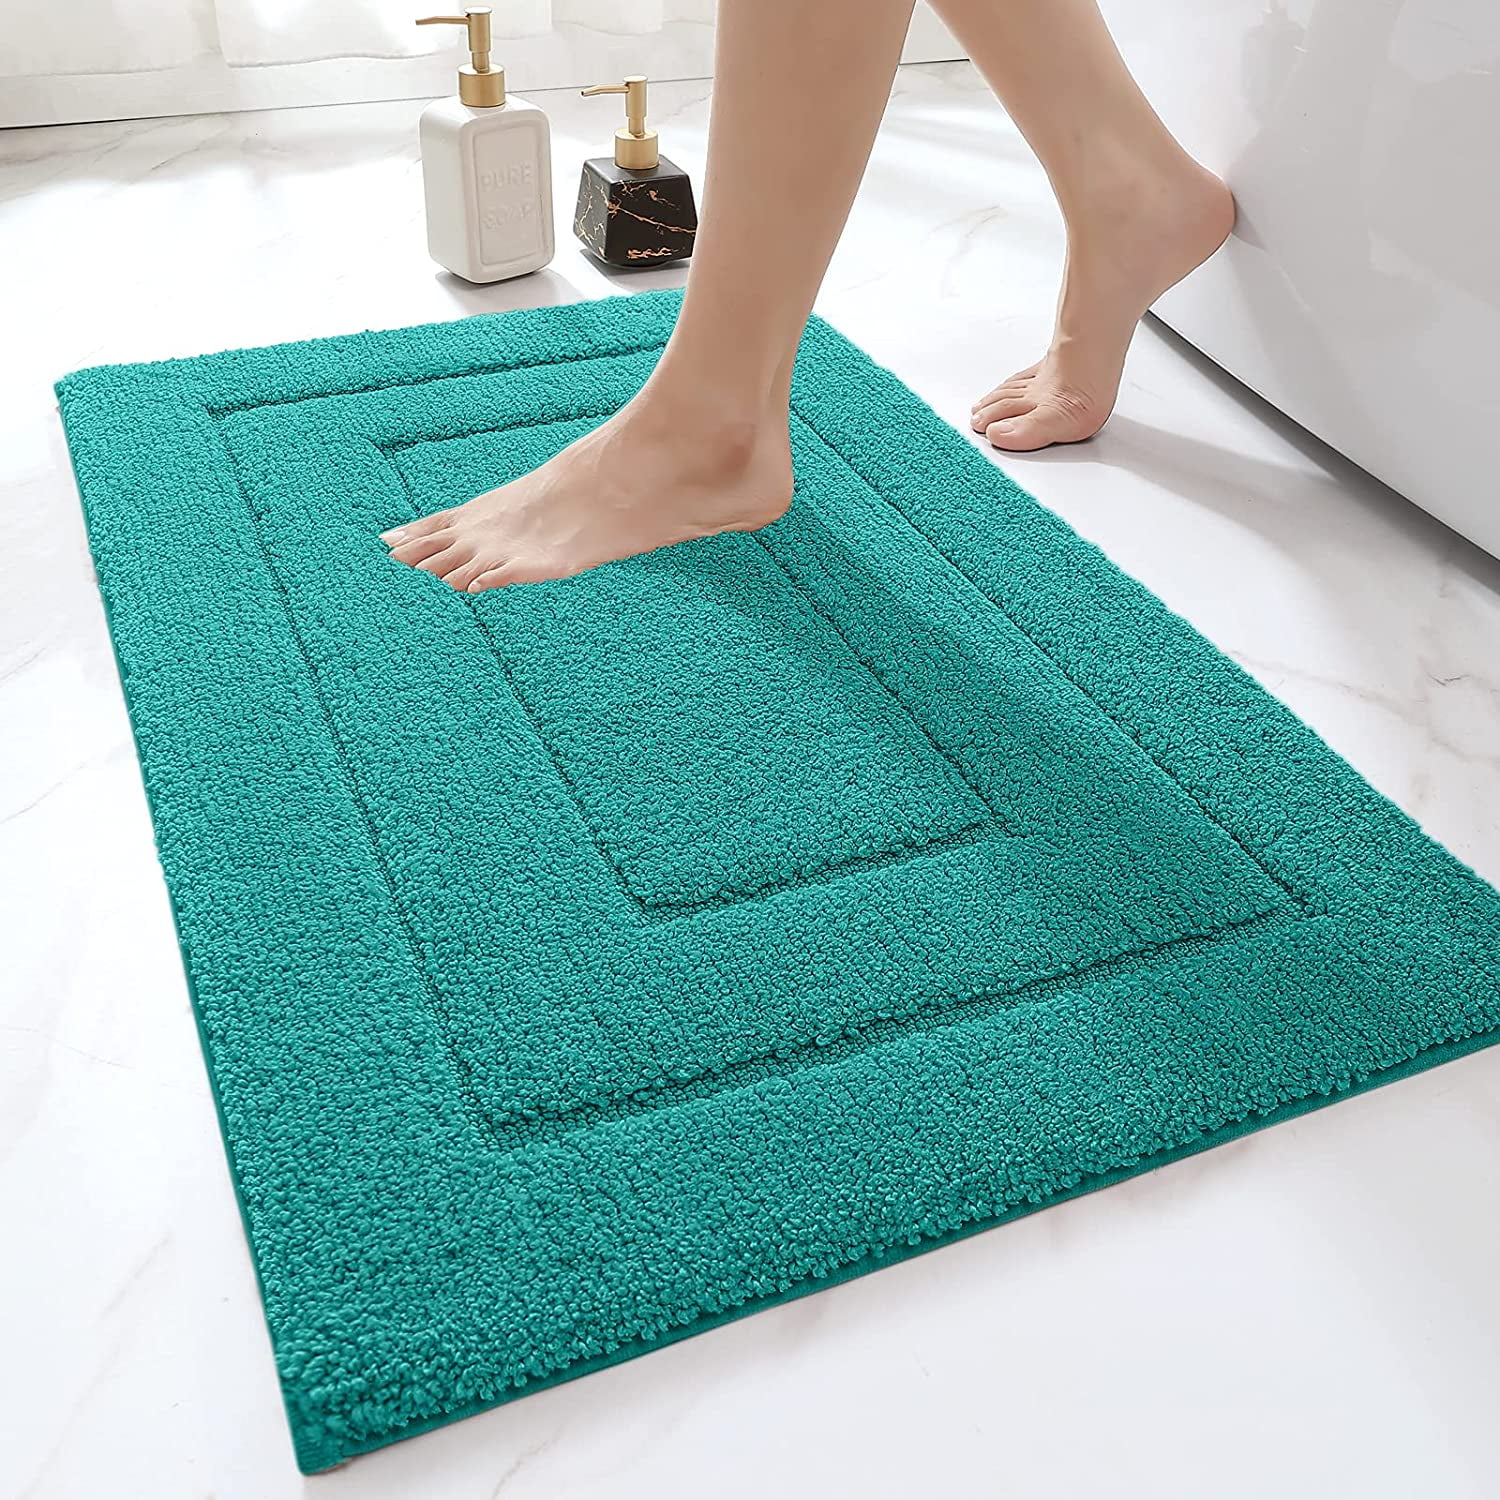 Details about   Soft Toggle Teal Bath Mat Soft Absorbent Surface Keep Bathroom Dry and Clean FF 